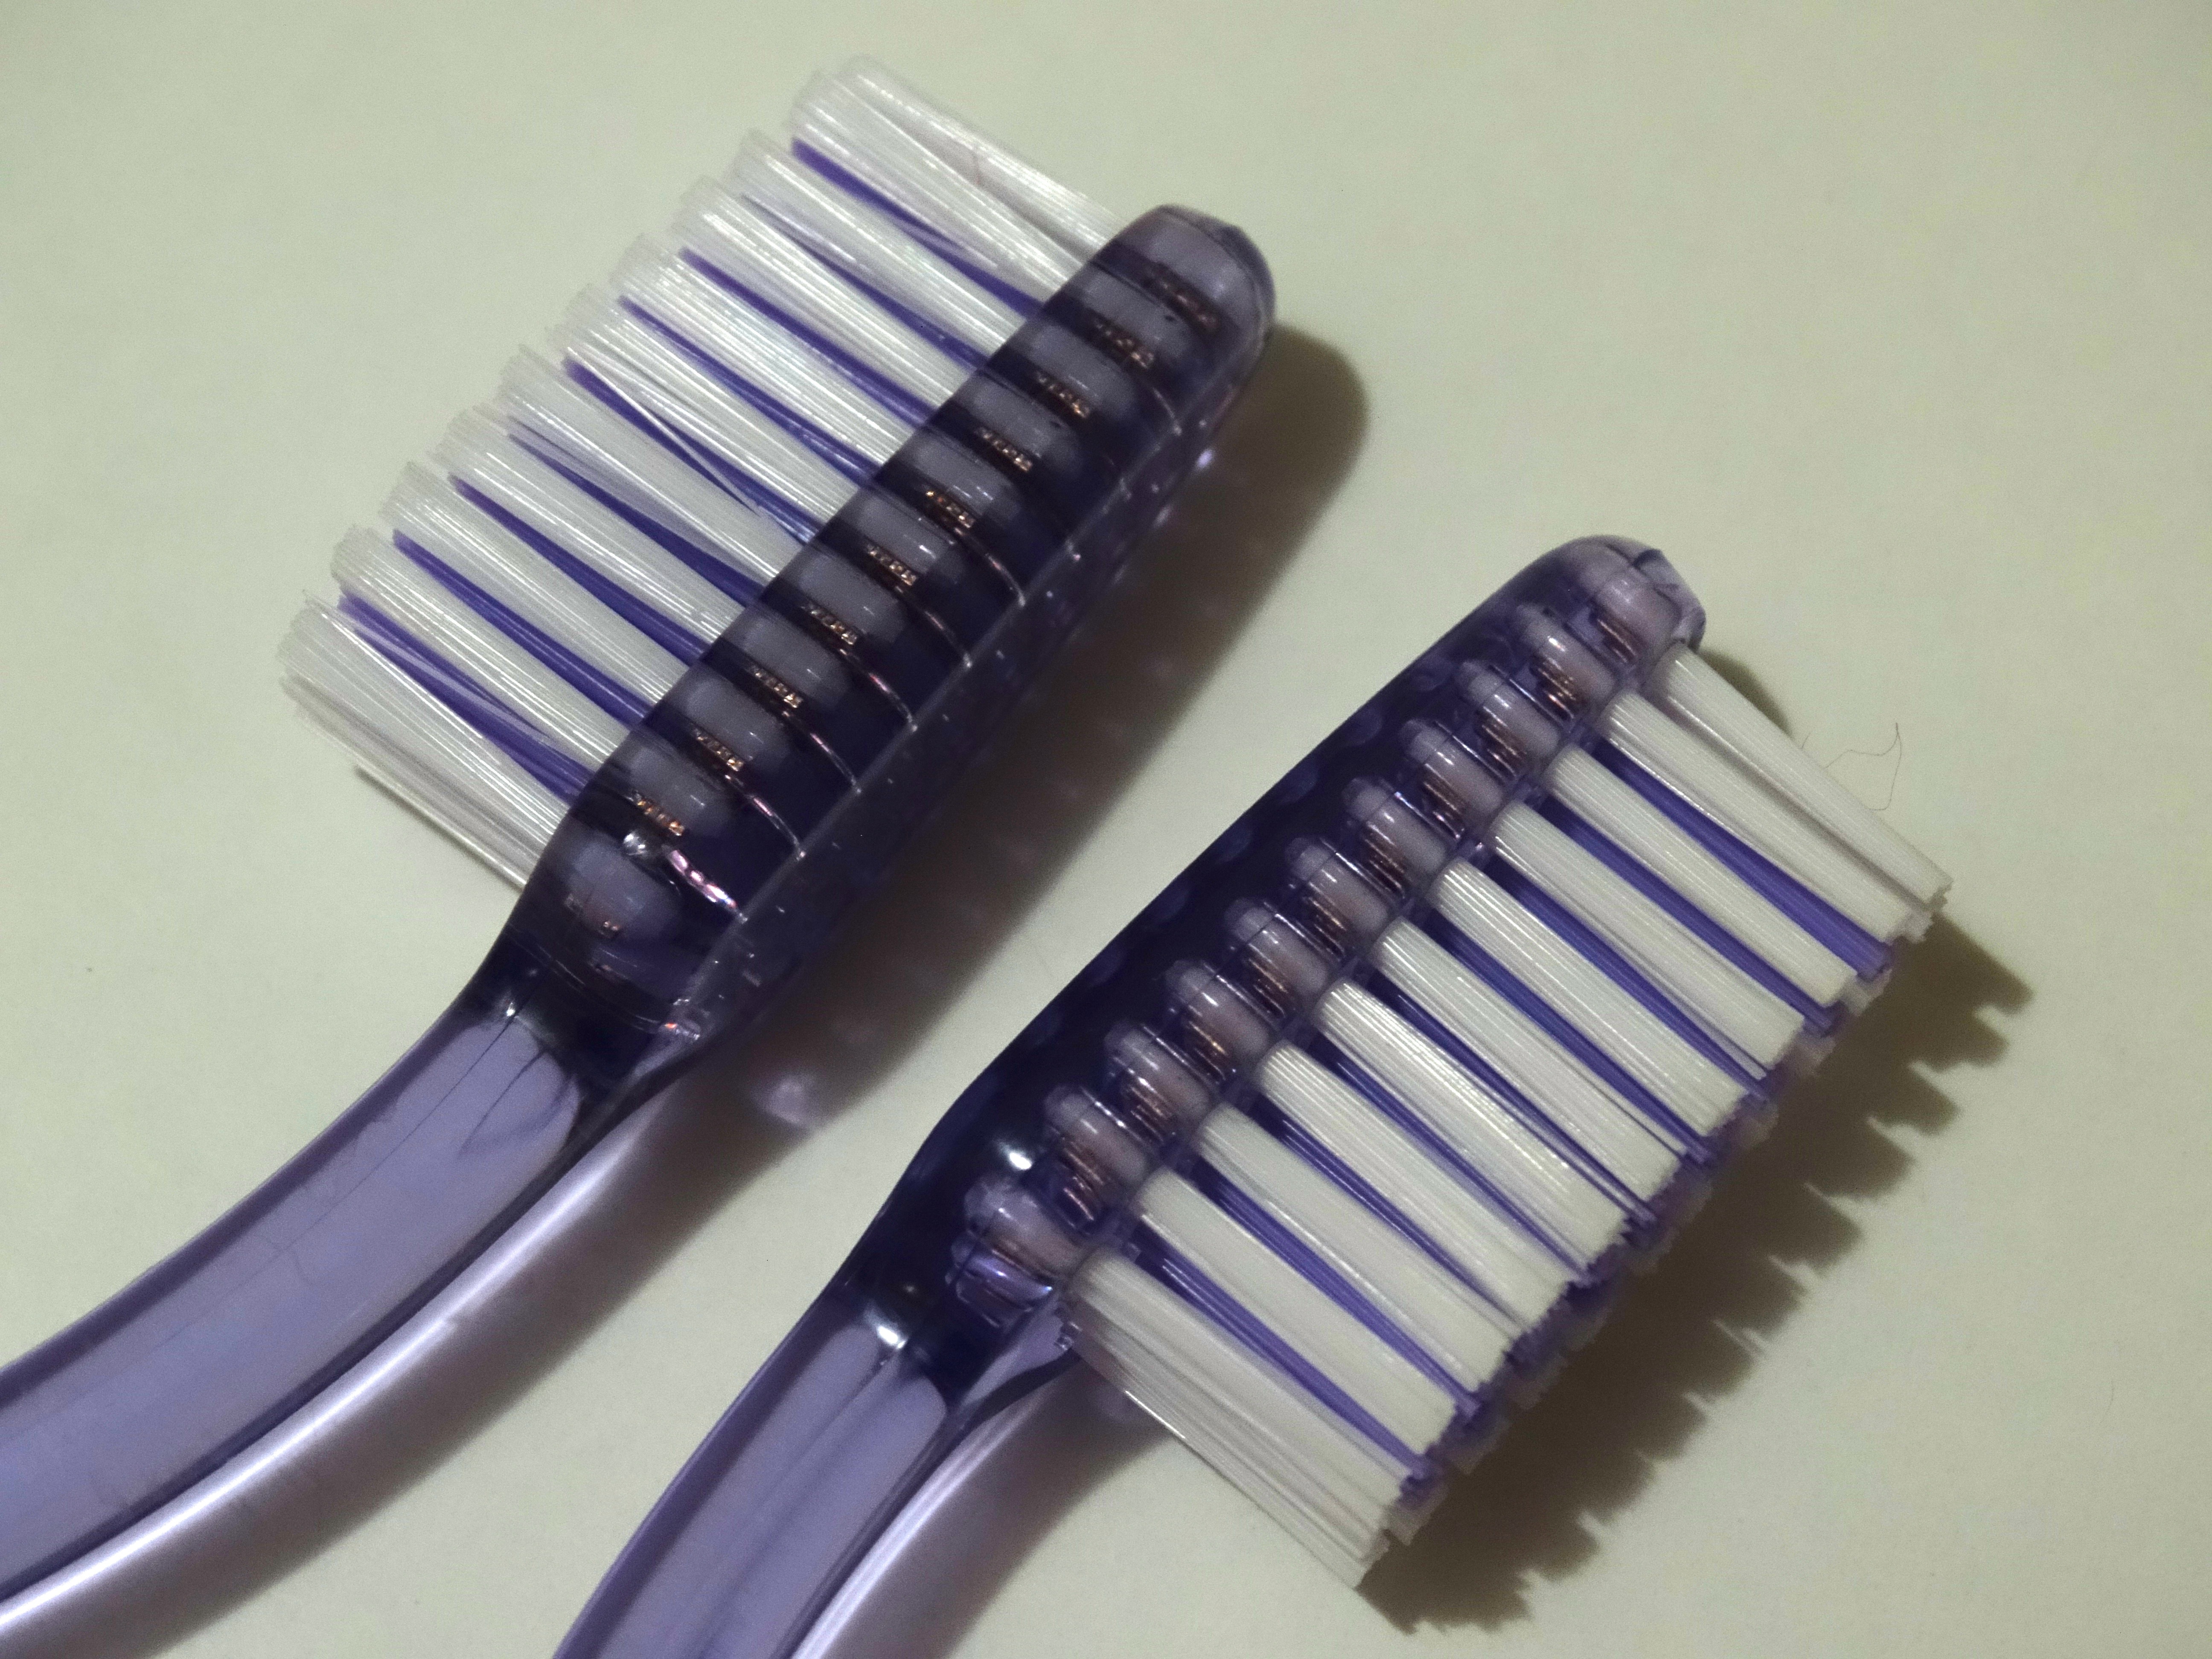 2 purple and white toothbrushes